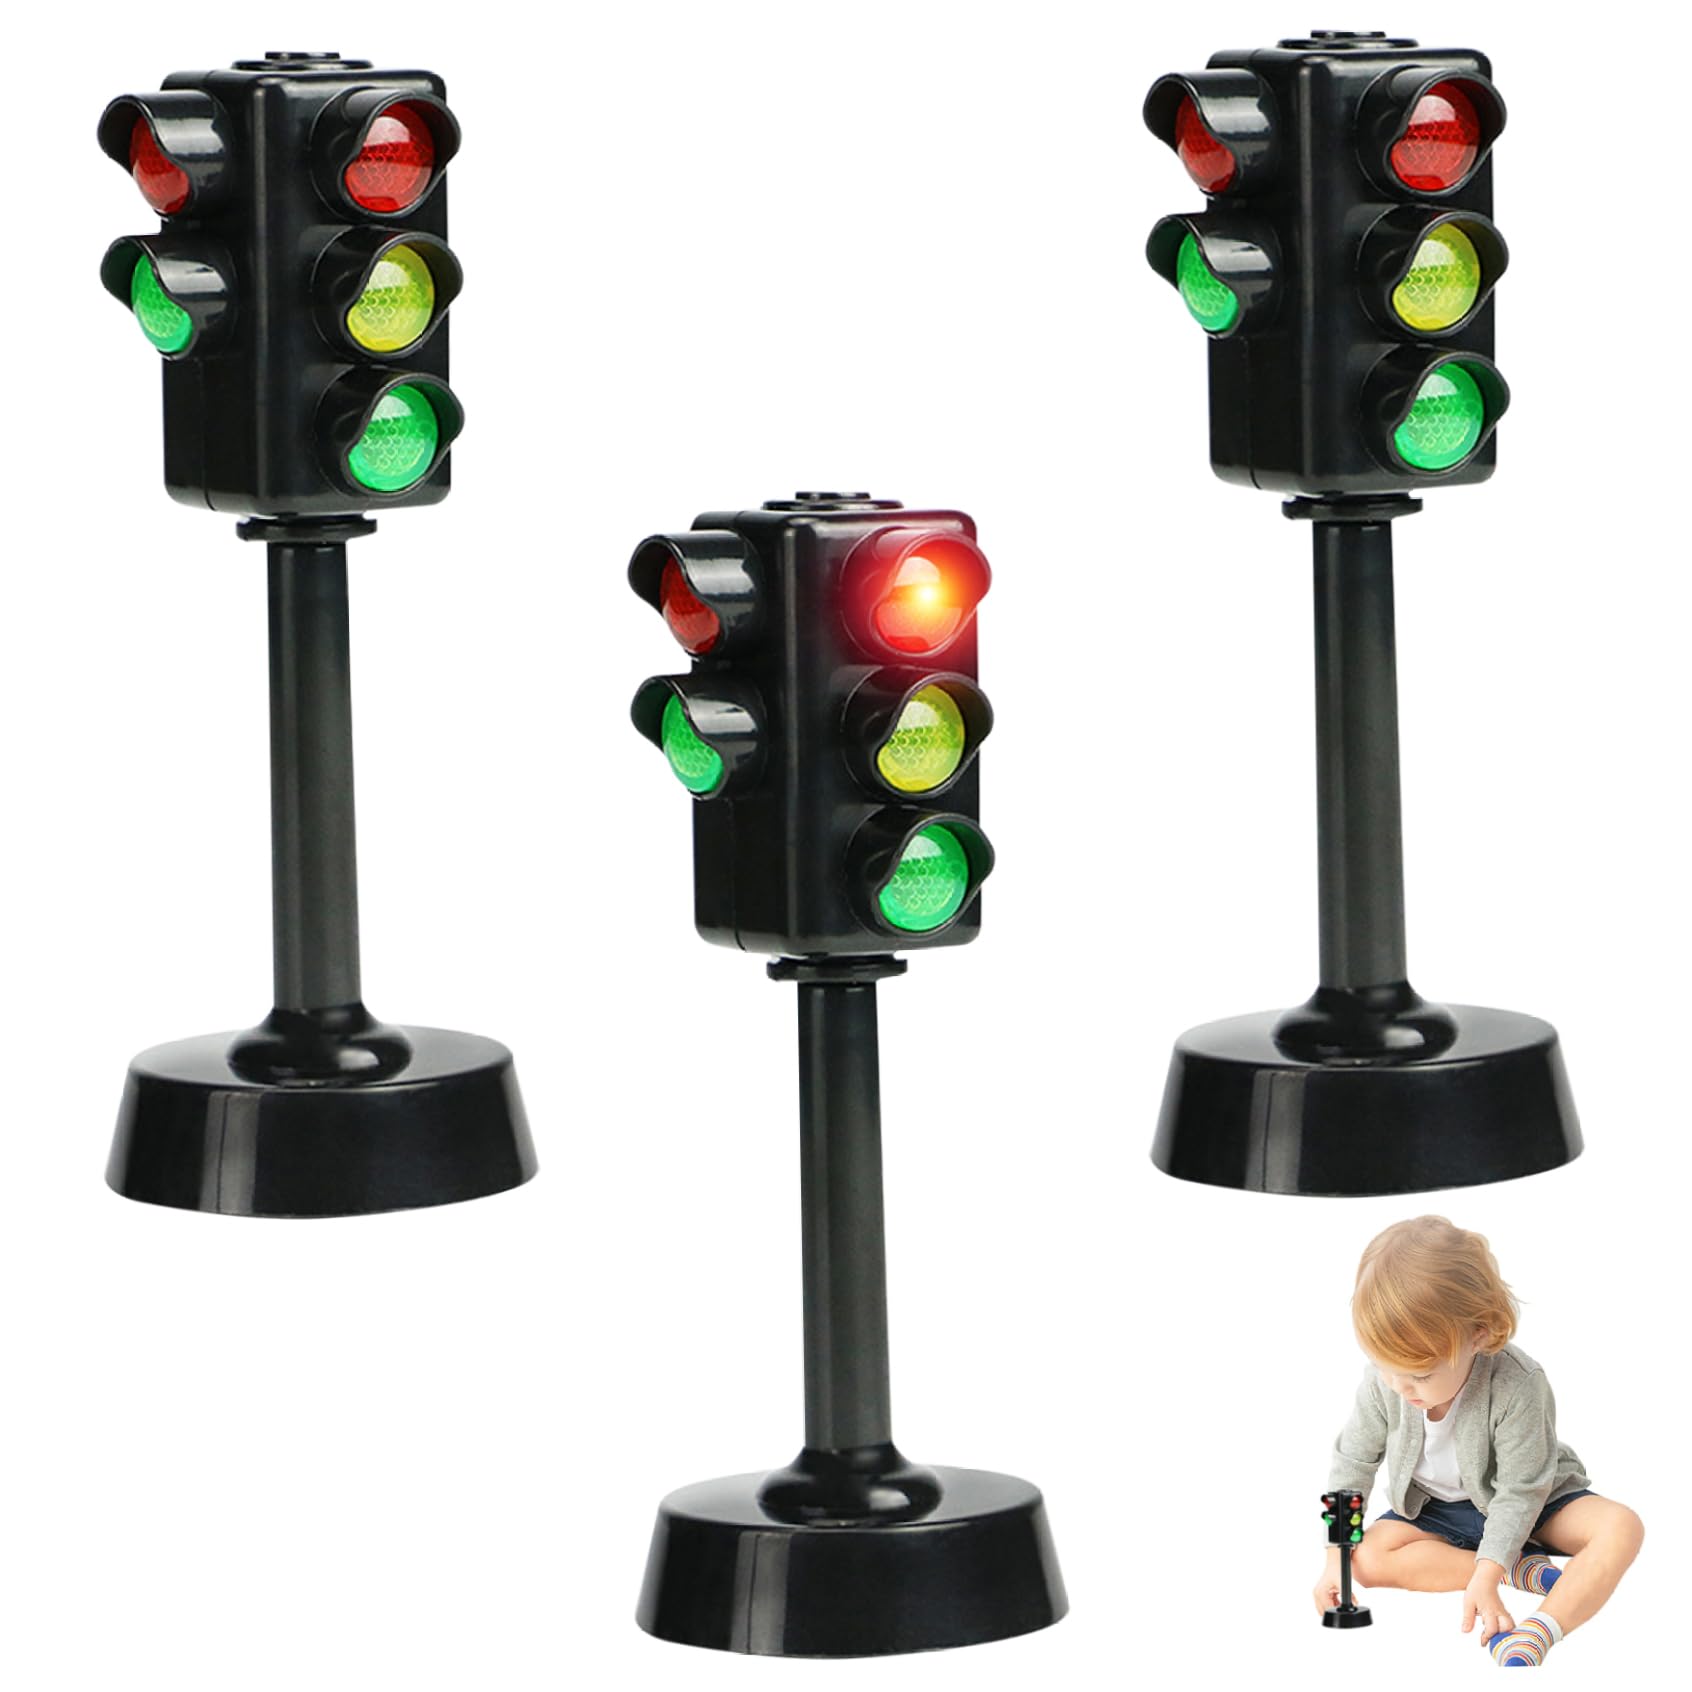 OnIUeZky 3PCS Traffic Lights for Kids, 4.7 inch Mini Toy Road Signs, Traffic Light Toys for Kids LED Toy Traffic Lights with Horn Sound, Early Education Stop Signs Traffic